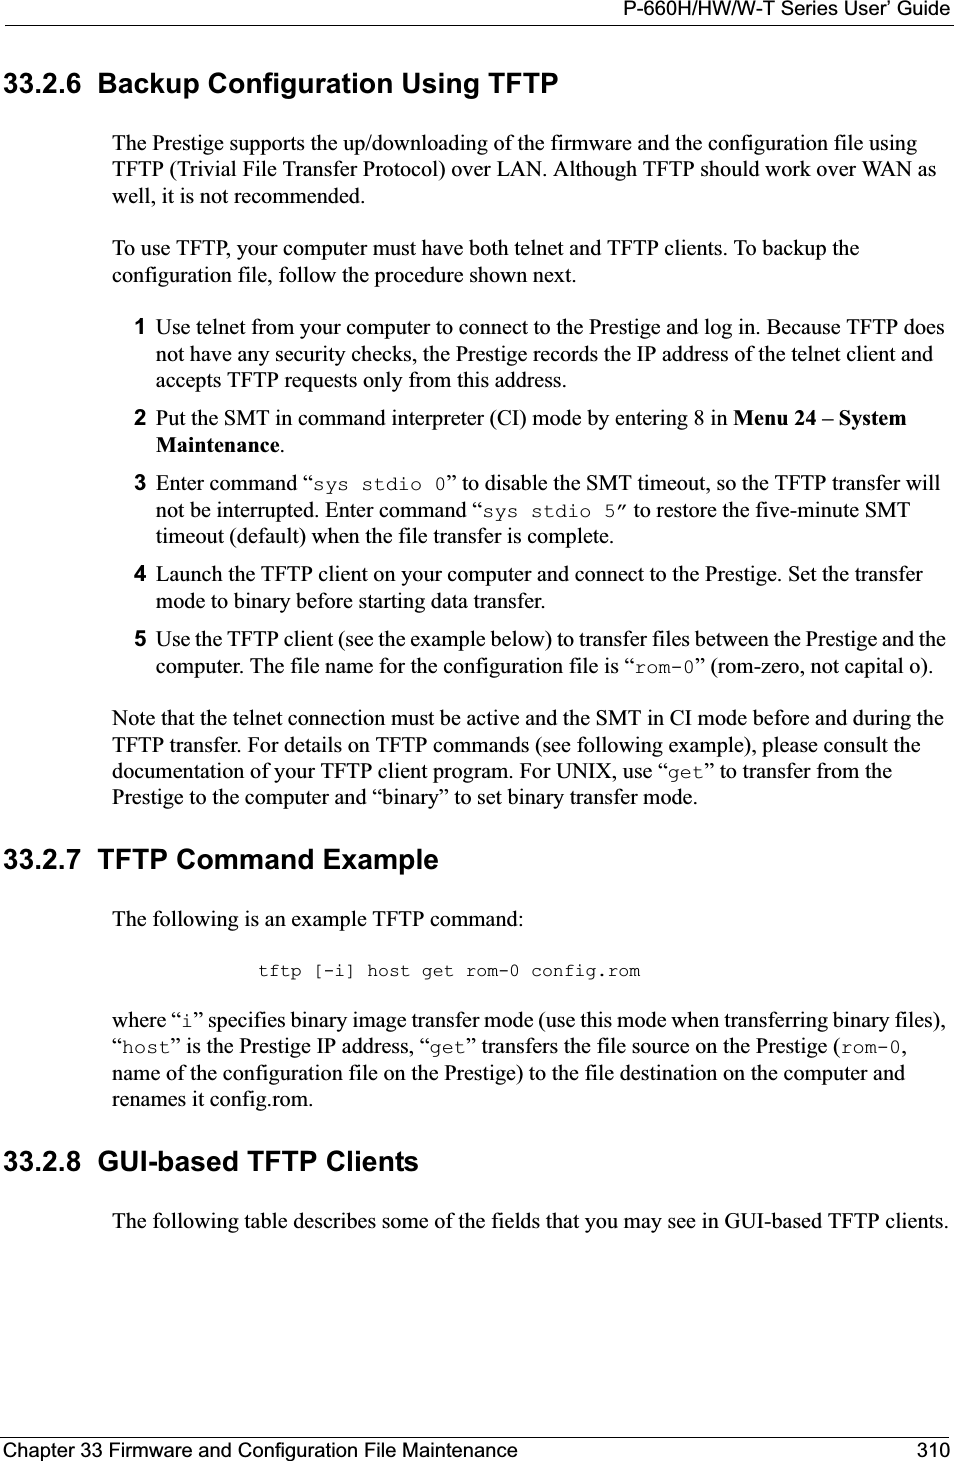 P-660H/HW/W-T Series User’ GuideChapter 33 Firmware and Configuration File Maintenance 31033.2.6  Backup Configuration Using TFTPThe Prestige supports the up/downloading of the firmware and the configuration file using TFTP (Trivial File Transfer Protocol) over LAN. Although TFTP should work over WAN as well, it is not recommended.To use TFTP, your computer must have both telnet and TFTP clients. To backup the configuration file, follow the procedure shown next.1Use telnet from your computer to connect to the Prestige and log in. Because TFTP does not have any security checks, the Prestige records the IP address of the telnet client and accepts TFTP requests only from this address.2Put the SMT in command interpreter (CI) mode by entering 8 in Menu 24 – SystemMaintenance.3Enter command “sys stdio 0” to disable the SMT timeout, so the TFTP transfer will not be interrupted. Enter command “sys stdio 5” to restore the five-minute SMT timeout (default) when the file transfer is complete.4Launch the TFTP client on your computer and connect to the Prestige. Set the transfer mode to binary before starting data transfer.5Use the TFTP client (see the example below) to transfer files between the Prestige and the computer. The file name for the configuration file is “rom-0” (rom-zero, not capital o).Note that the telnet connection must be active and the SMT in CI mode before and during the TFTP transfer. For details on TFTP commands (see following example), please consult the documentation of your TFTP client program. For UNIX, use “get” to transfer from the Prestige to the computer and “binary” to set binary transfer mode.33.2.7  TFTP Command ExampleThe following is an example TFTP command:tftp [-i] host get rom-0 config.romwhere “i” specifies binary image transfer mode (use this mode when transferring binary files), “host” is the Prestige IP address, “get” transfers the file source on the Prestige (rom-0,name of the configuration file on the Prestige) to the file destination on the computer and renames it config.rom.33.2.8  GUI-based TFTP ClientsThe following table describes some of the fields that you may see in GUI-based TFTP clients.